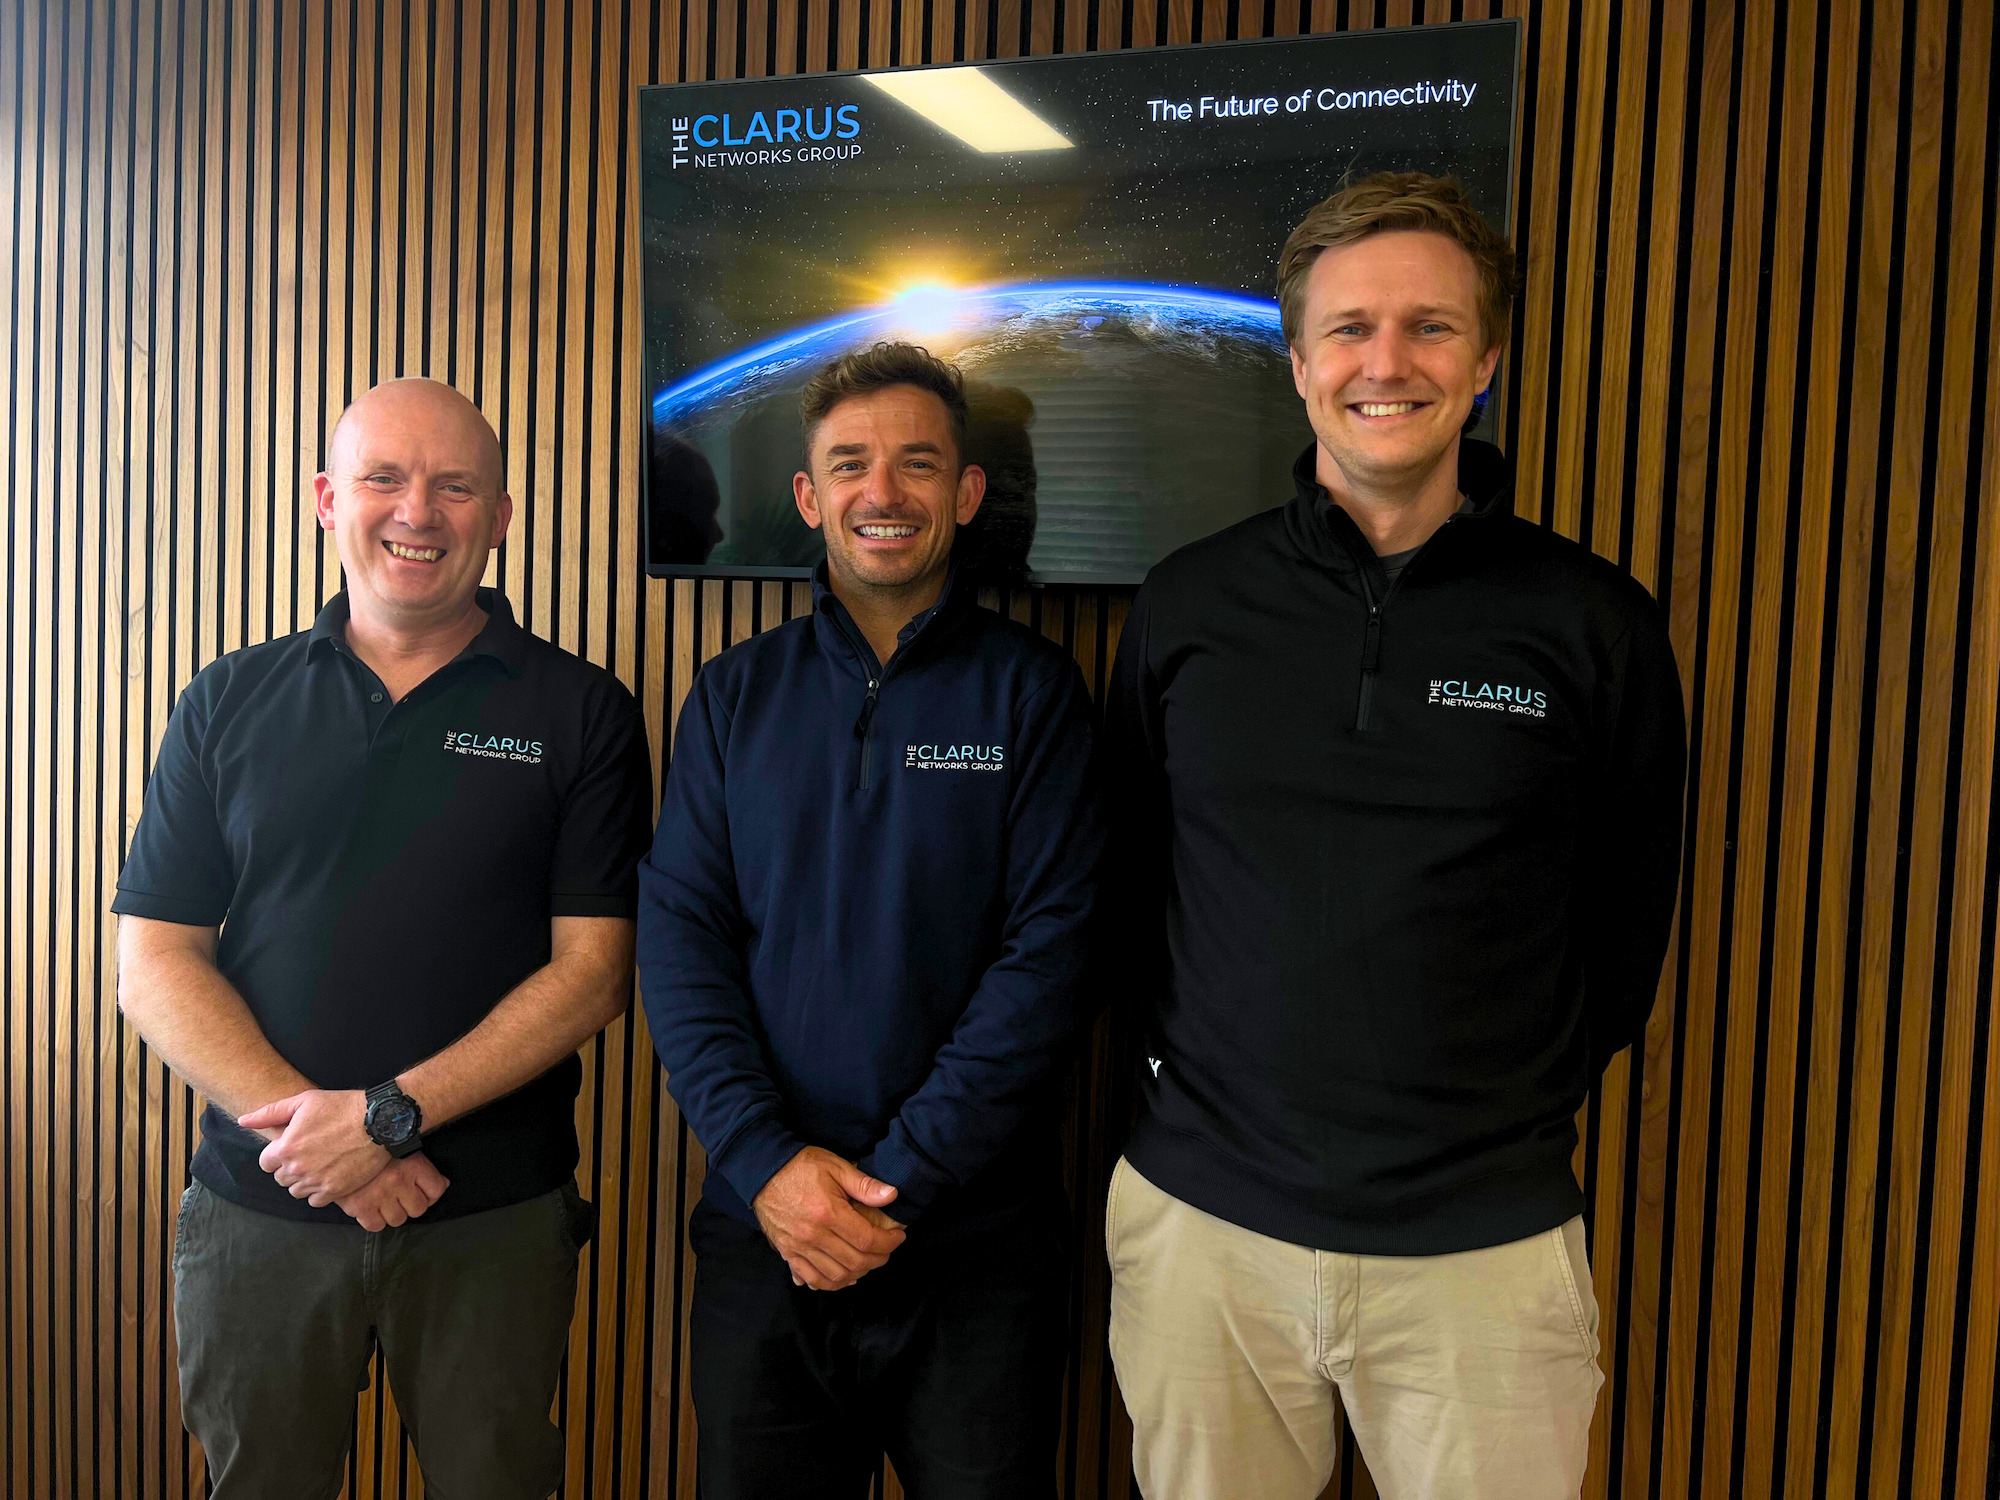 Clarus Networks Group dives into maritime connectivity with new division